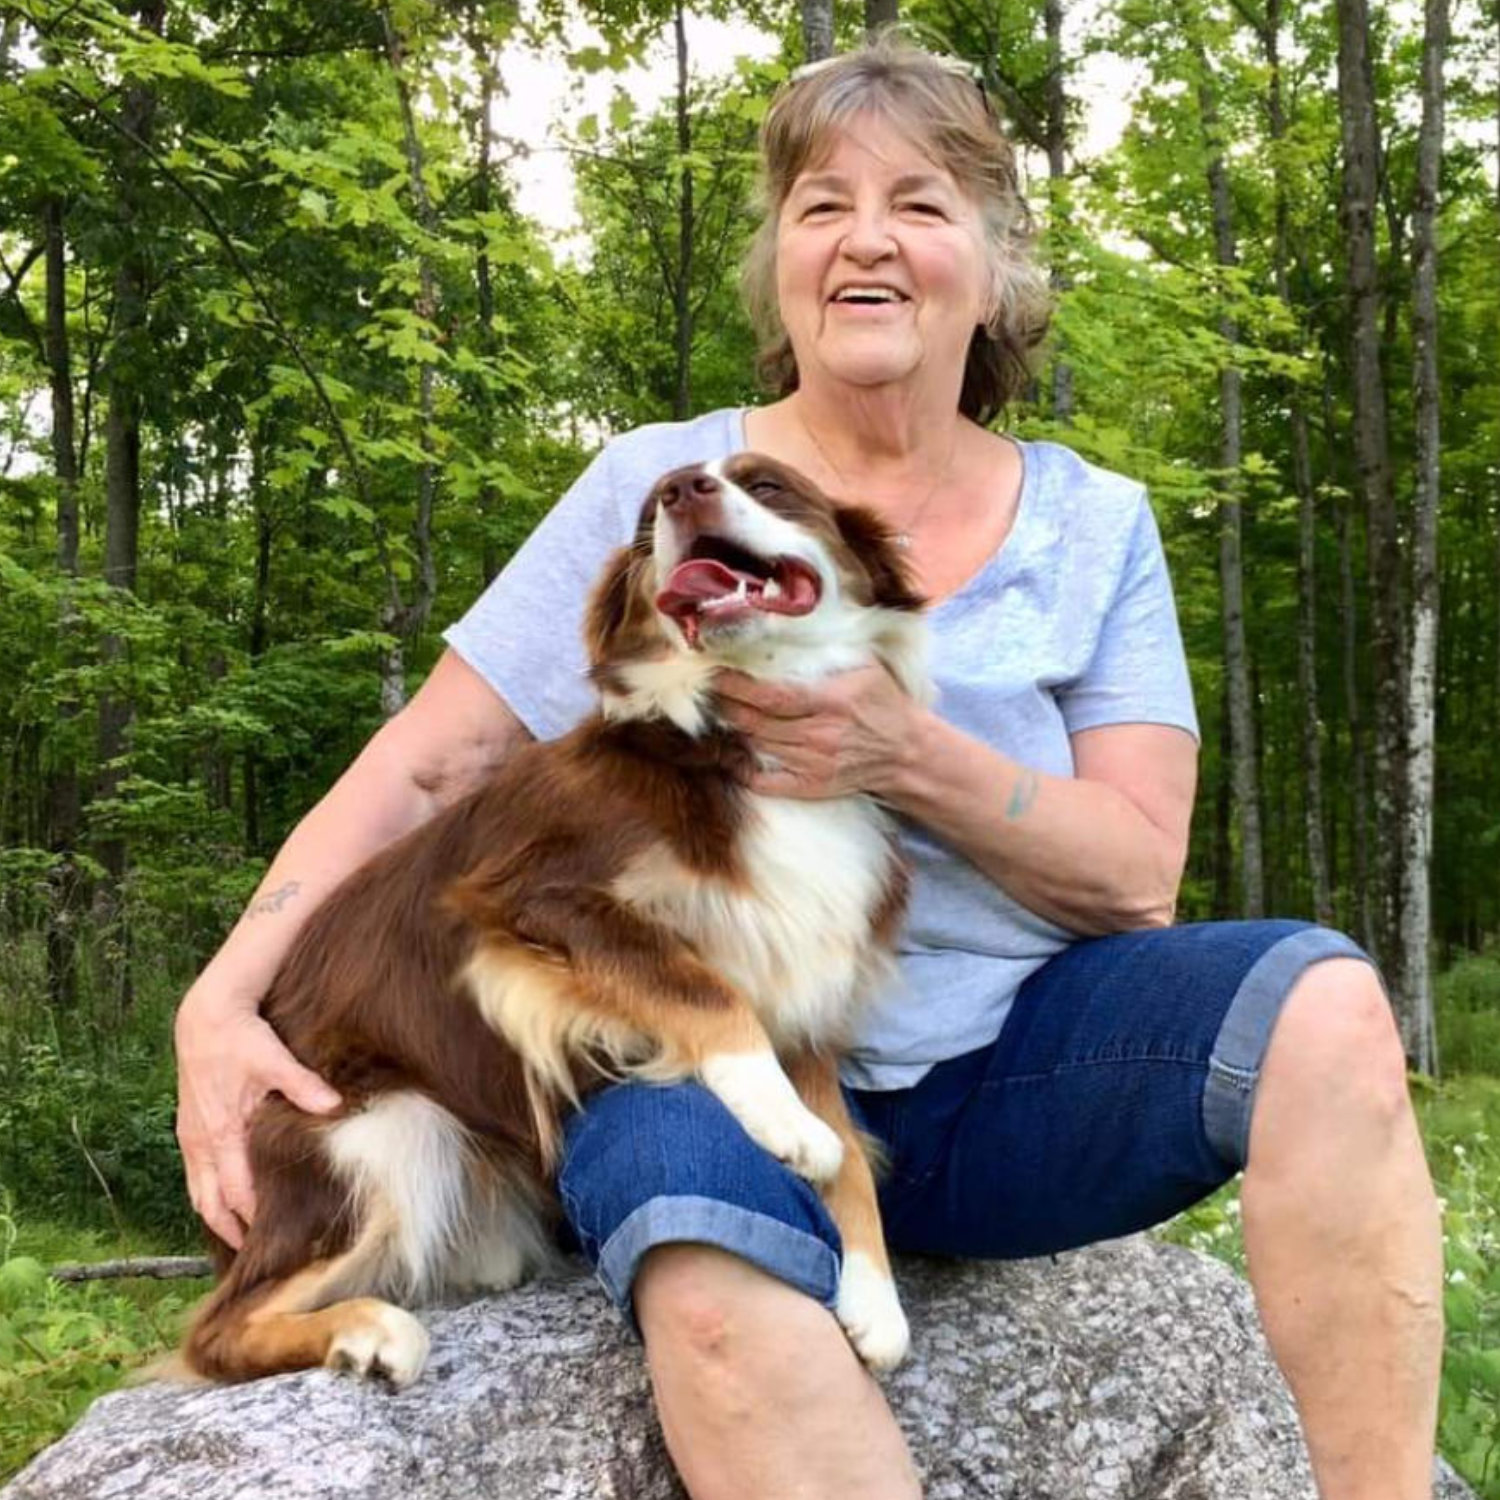 Deb Claus with dog in lap sitting on rock